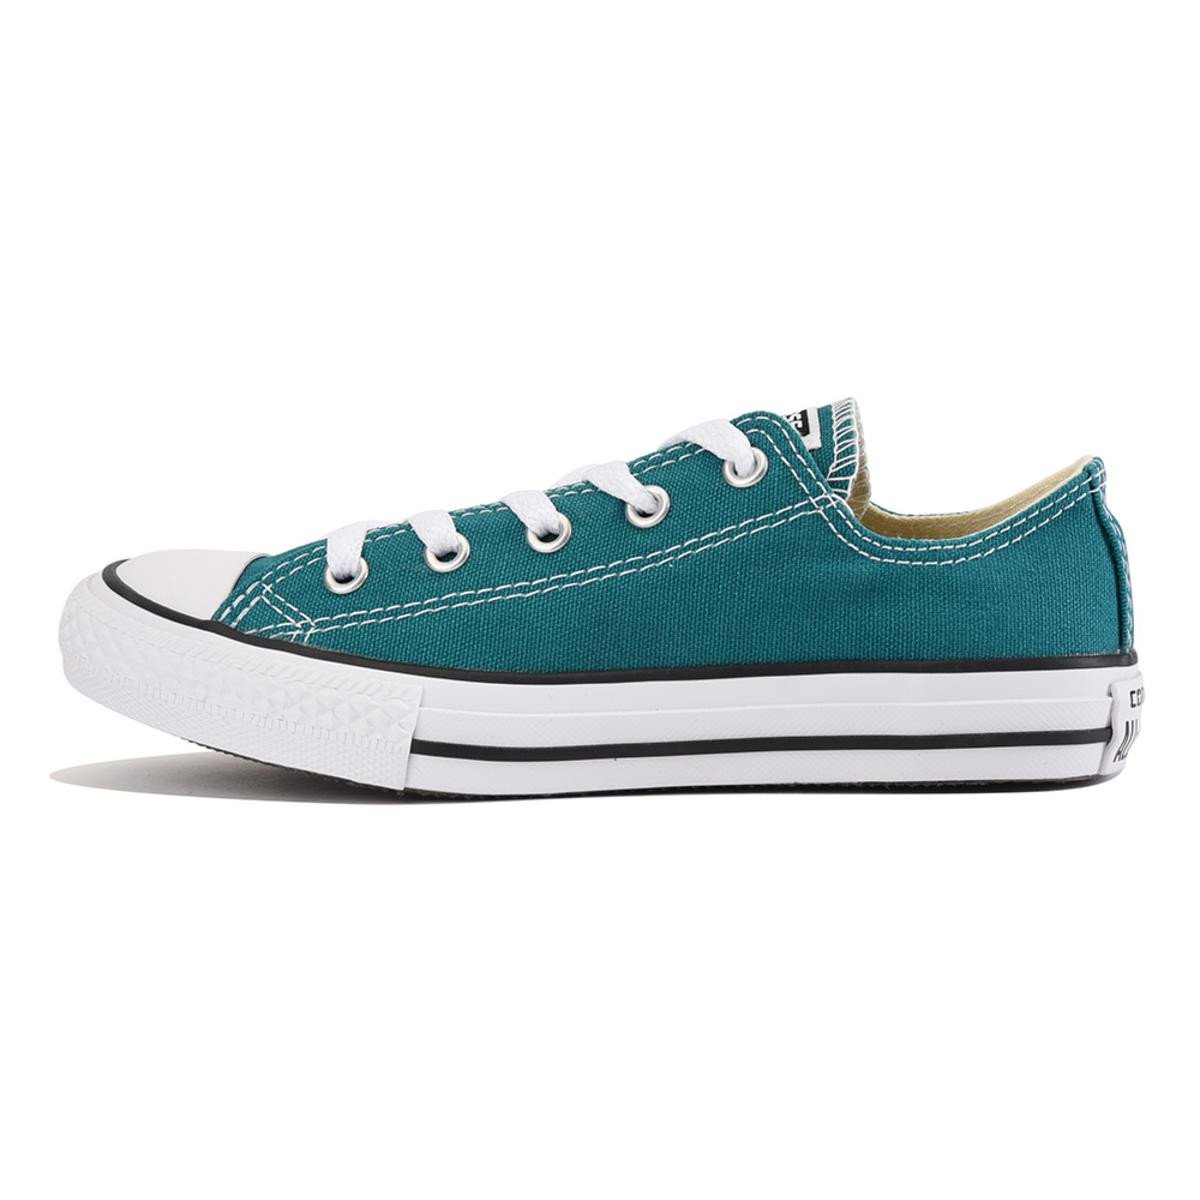 Converse for Kids: Chuck Taylor All Star Ox Rebel Teal Sneaker